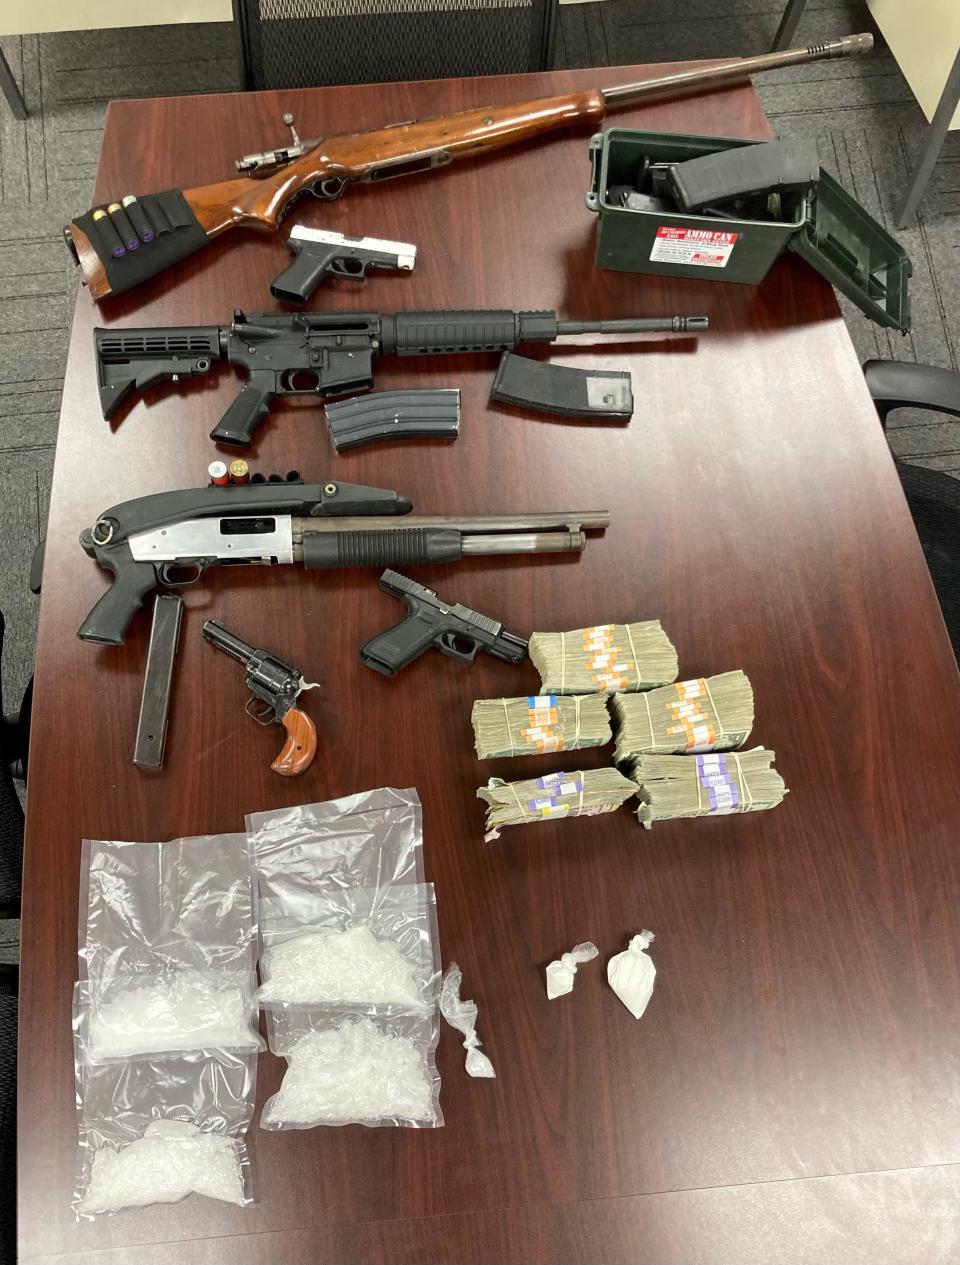 A Muncie-Delaware County Drug Task Force search warrant served on Jan. 31, 2022, at a home on East 14th Street resulted in seizure of more than 1.5 pounds of meth, 63.9 grams of fentanyl, six guns and drug paraphernalia.